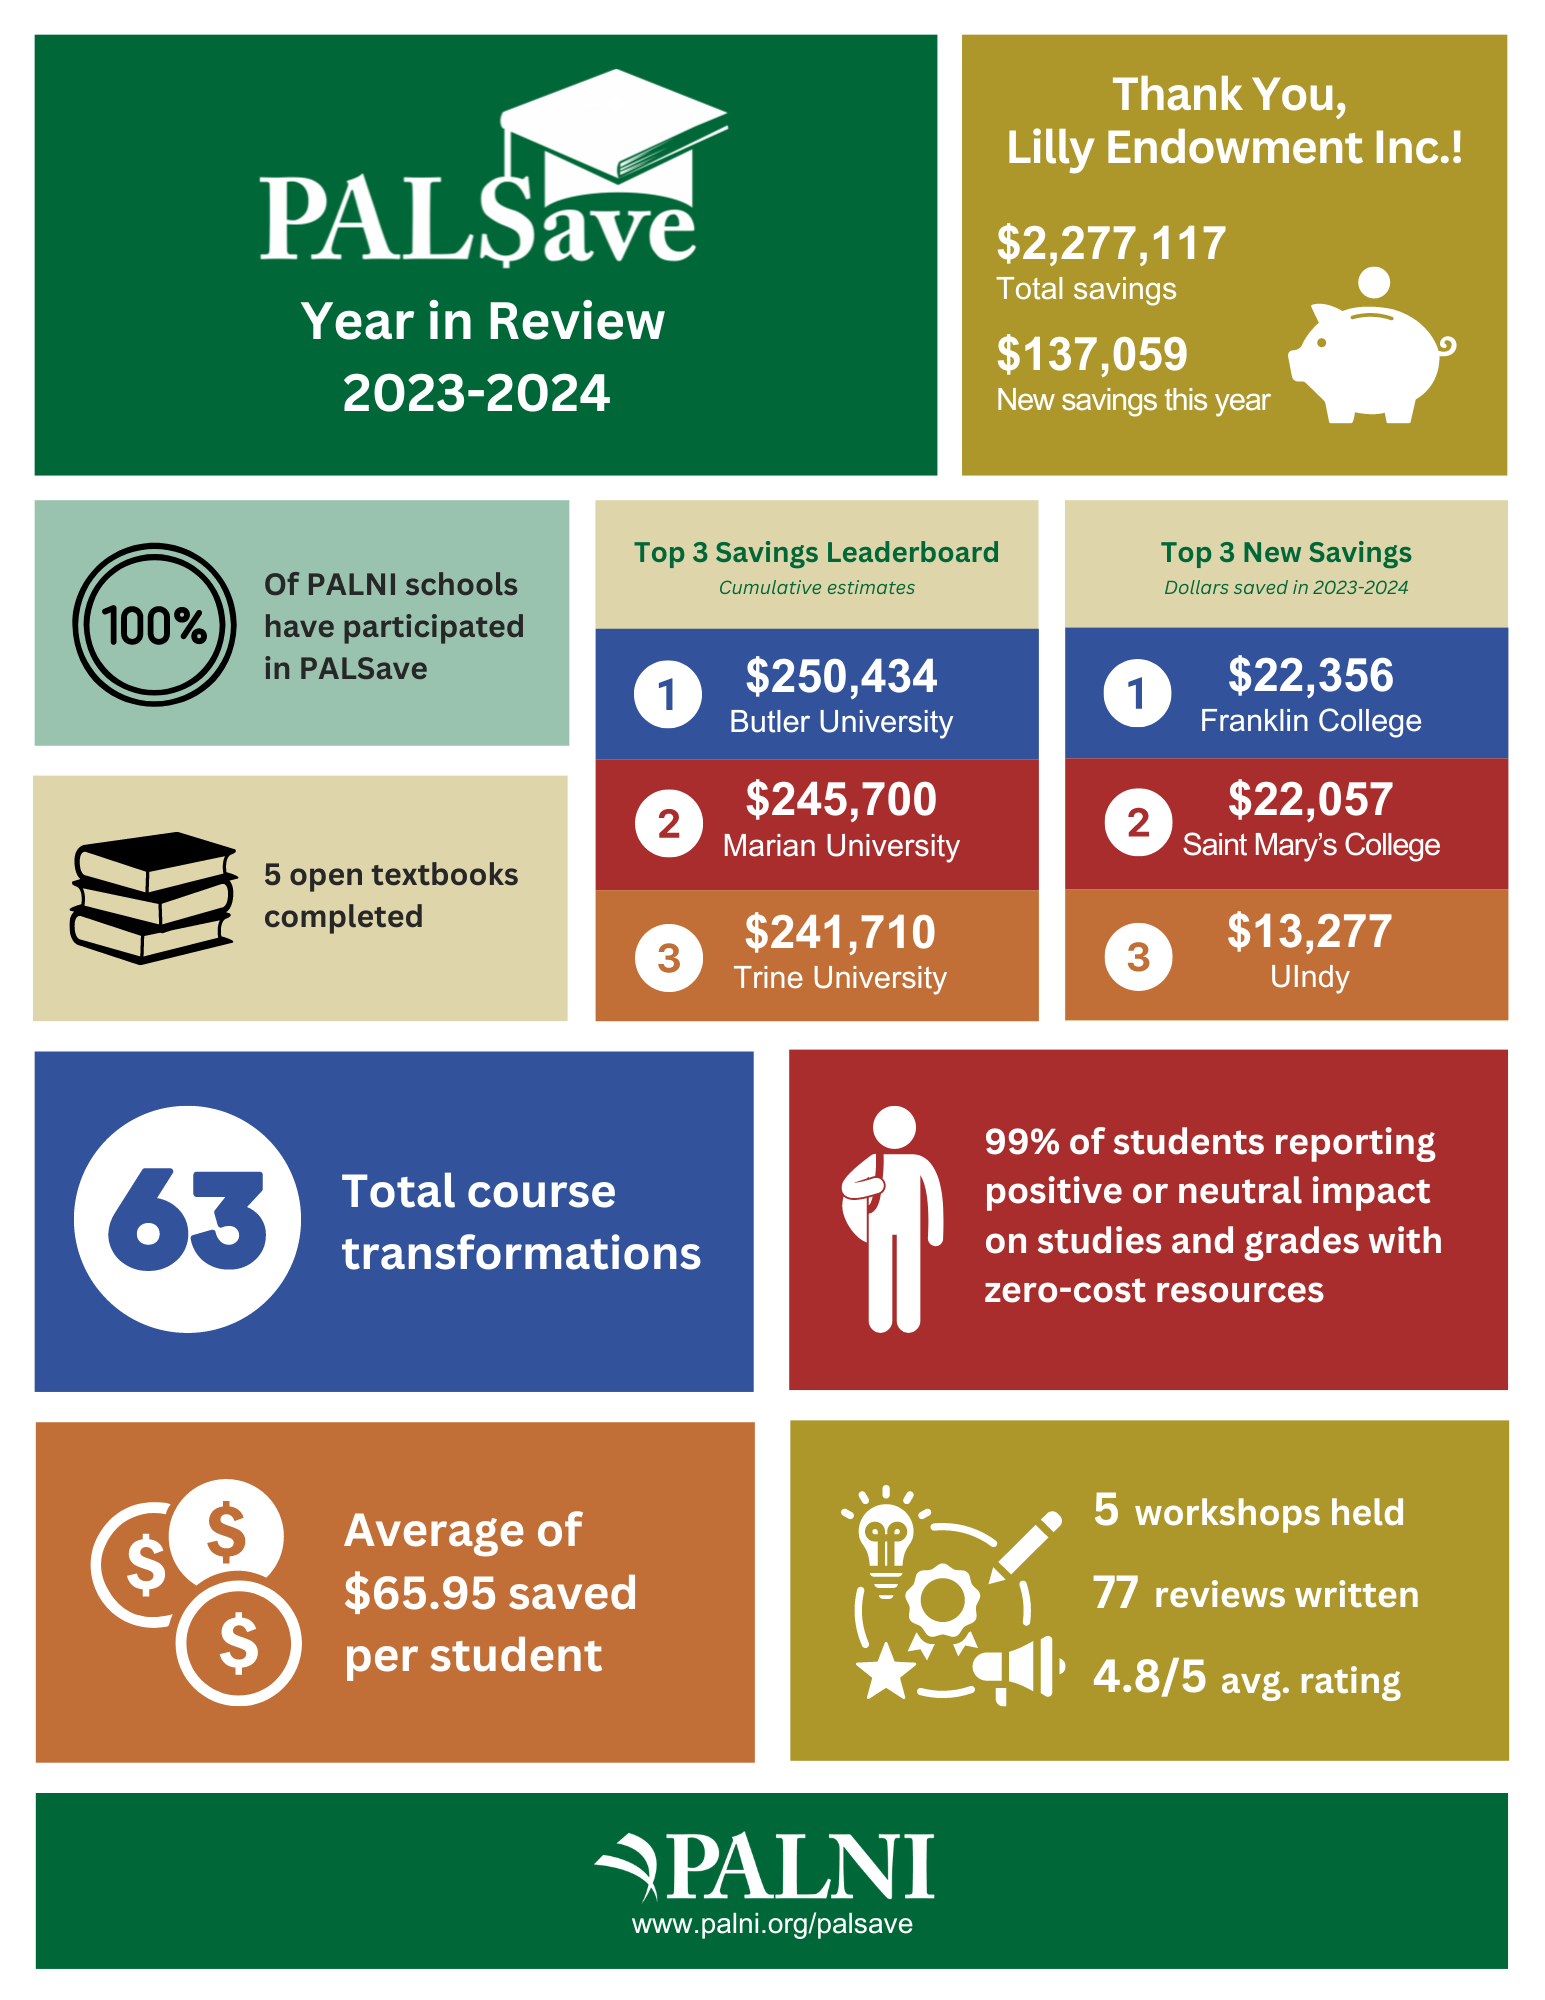 An accessible version of the PALSave 2023-24 Year in Review report is available at: https://palni.org/palsave/reports-accessible-23-24